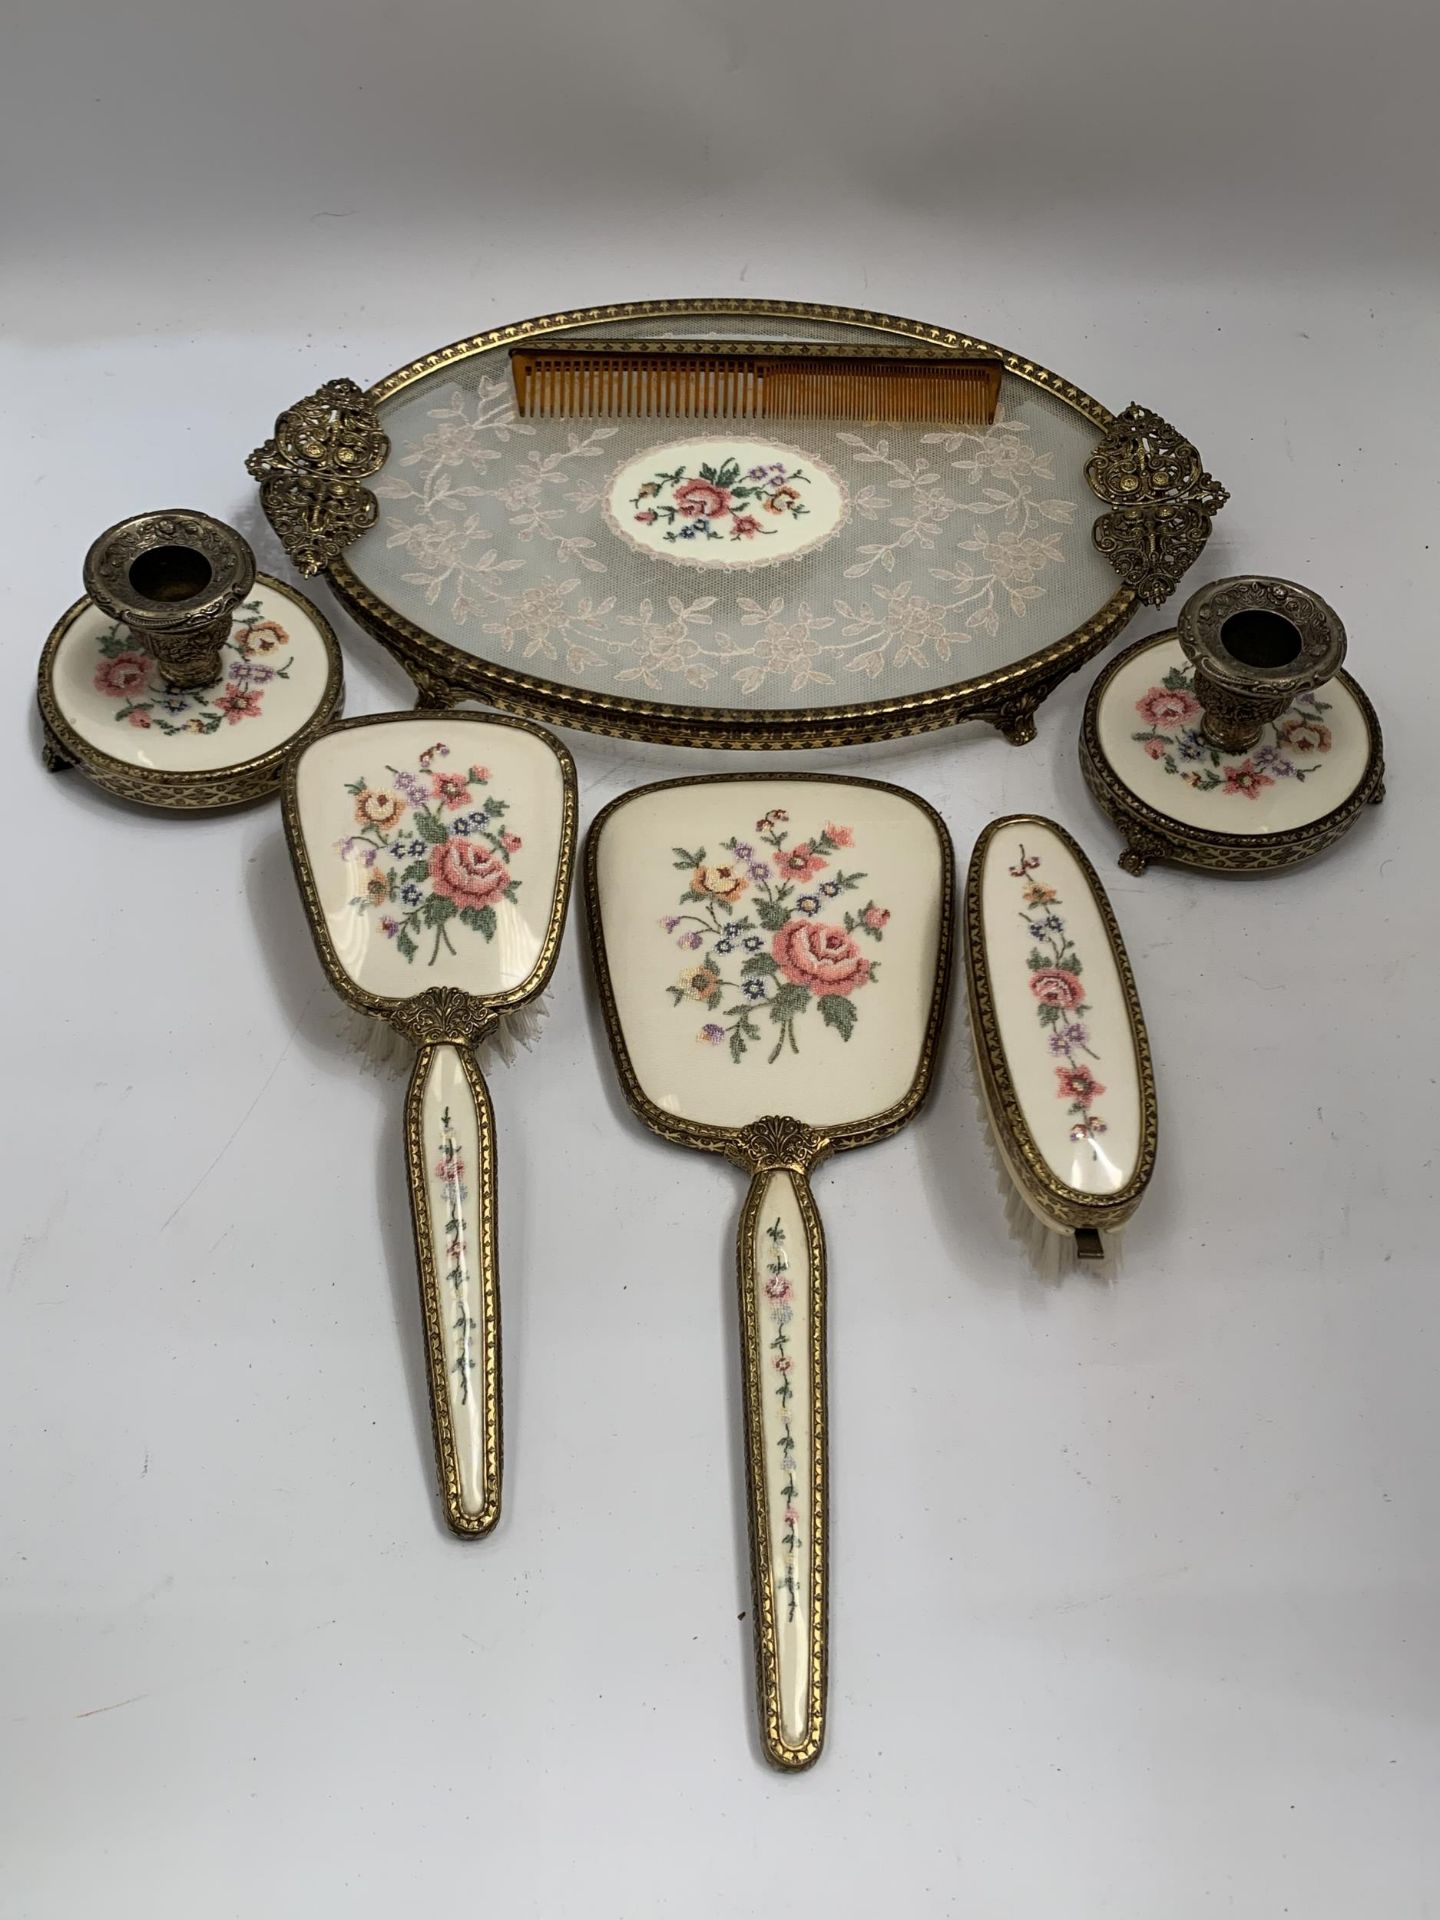 A VINTAGE FLORAL EMBROIDERED DRESSING SET WITH TRAY AND CANDLESTICKS ETC